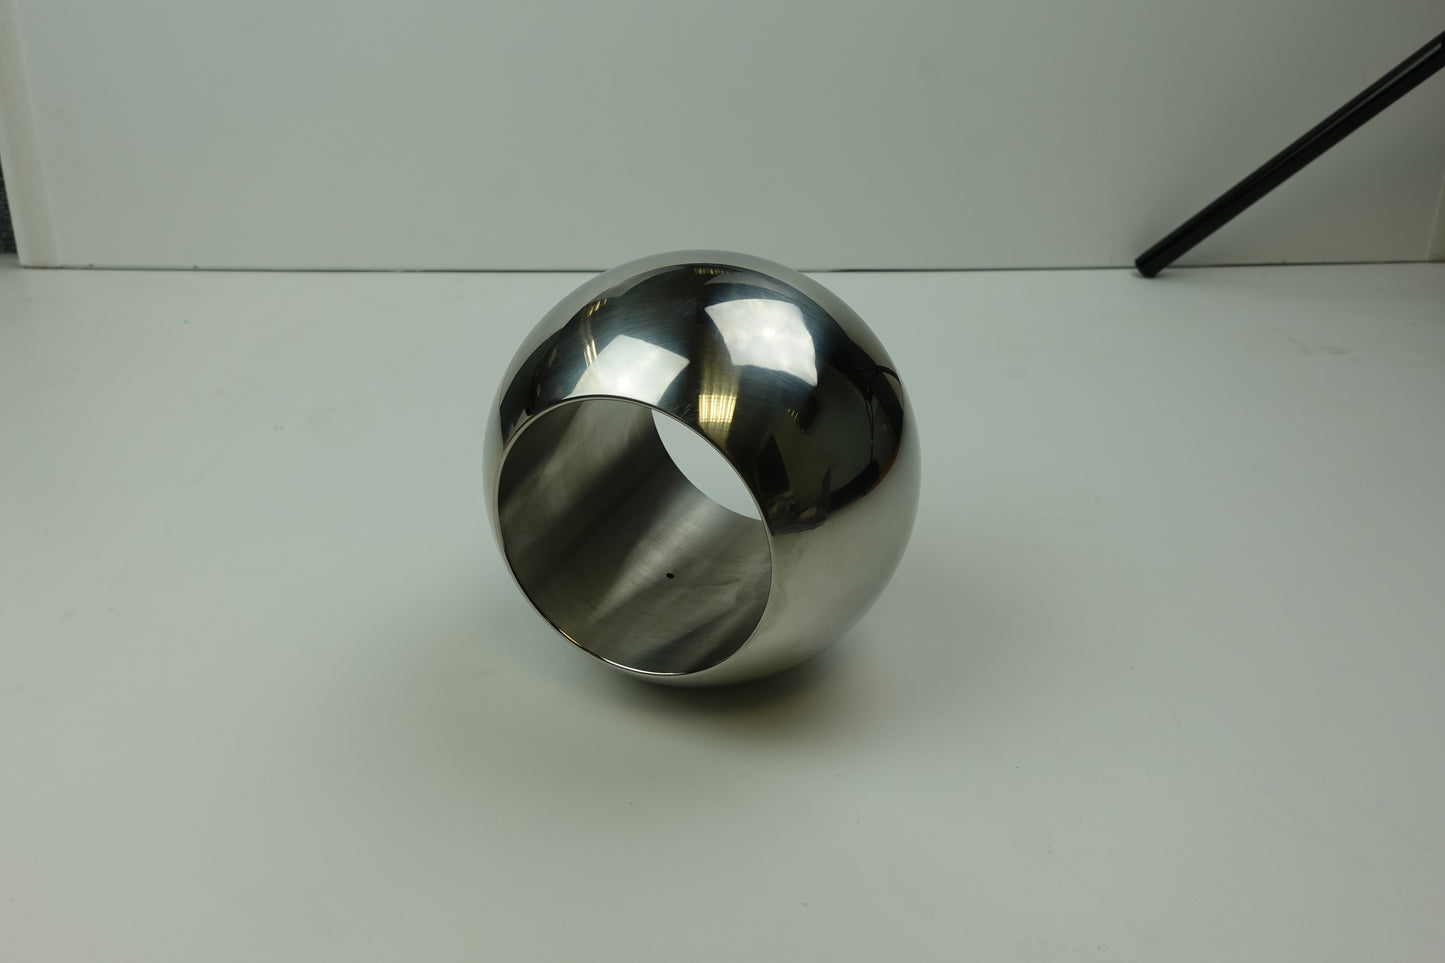 318007006 4" SOLID STAINLESS STEEL BALL FOR VALPRES 4" 7210018 WAFER VALVE.